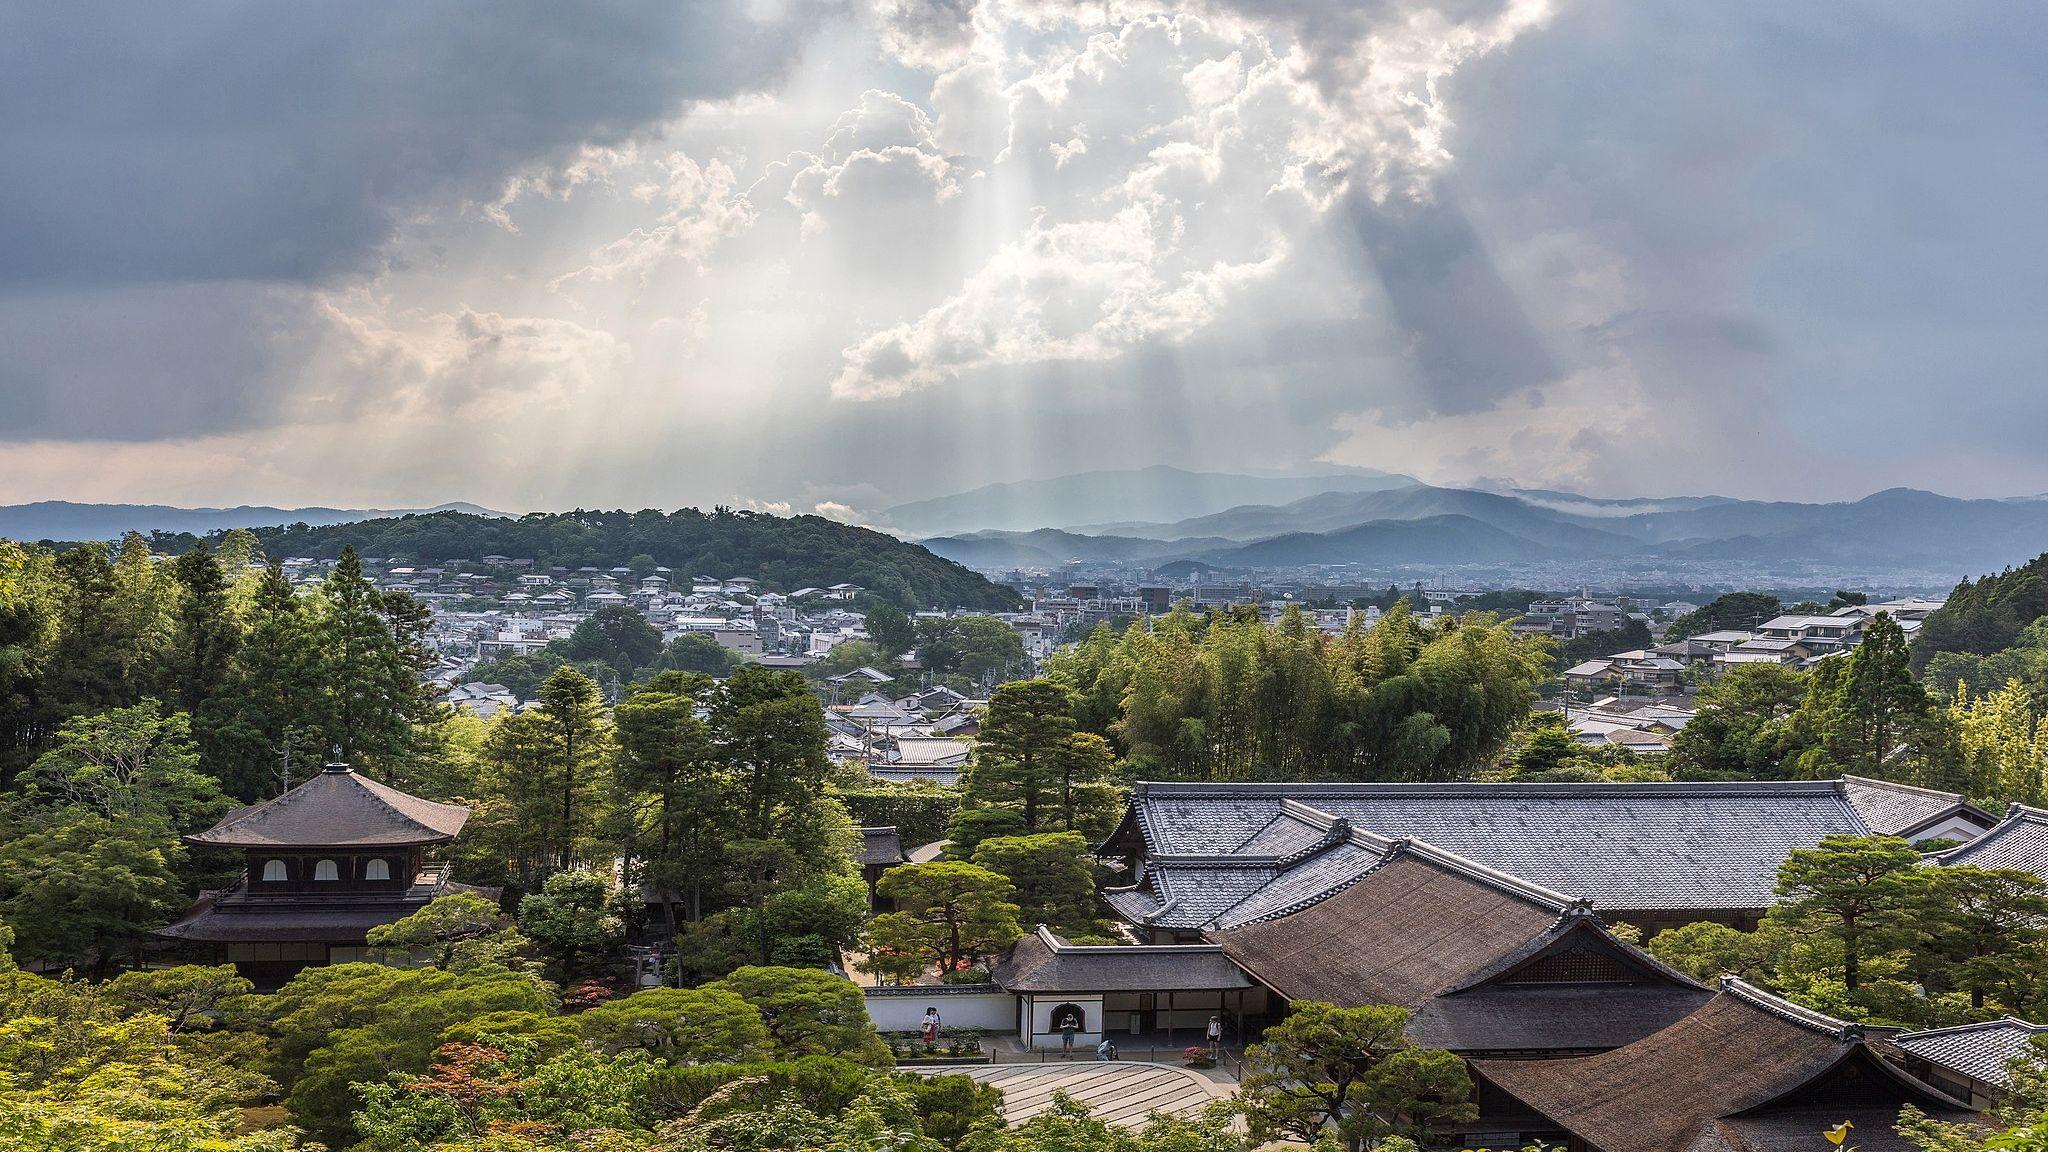 Sunlight through clouds and view of Ginkaku-ji Temple from above, Kyoto, Japan